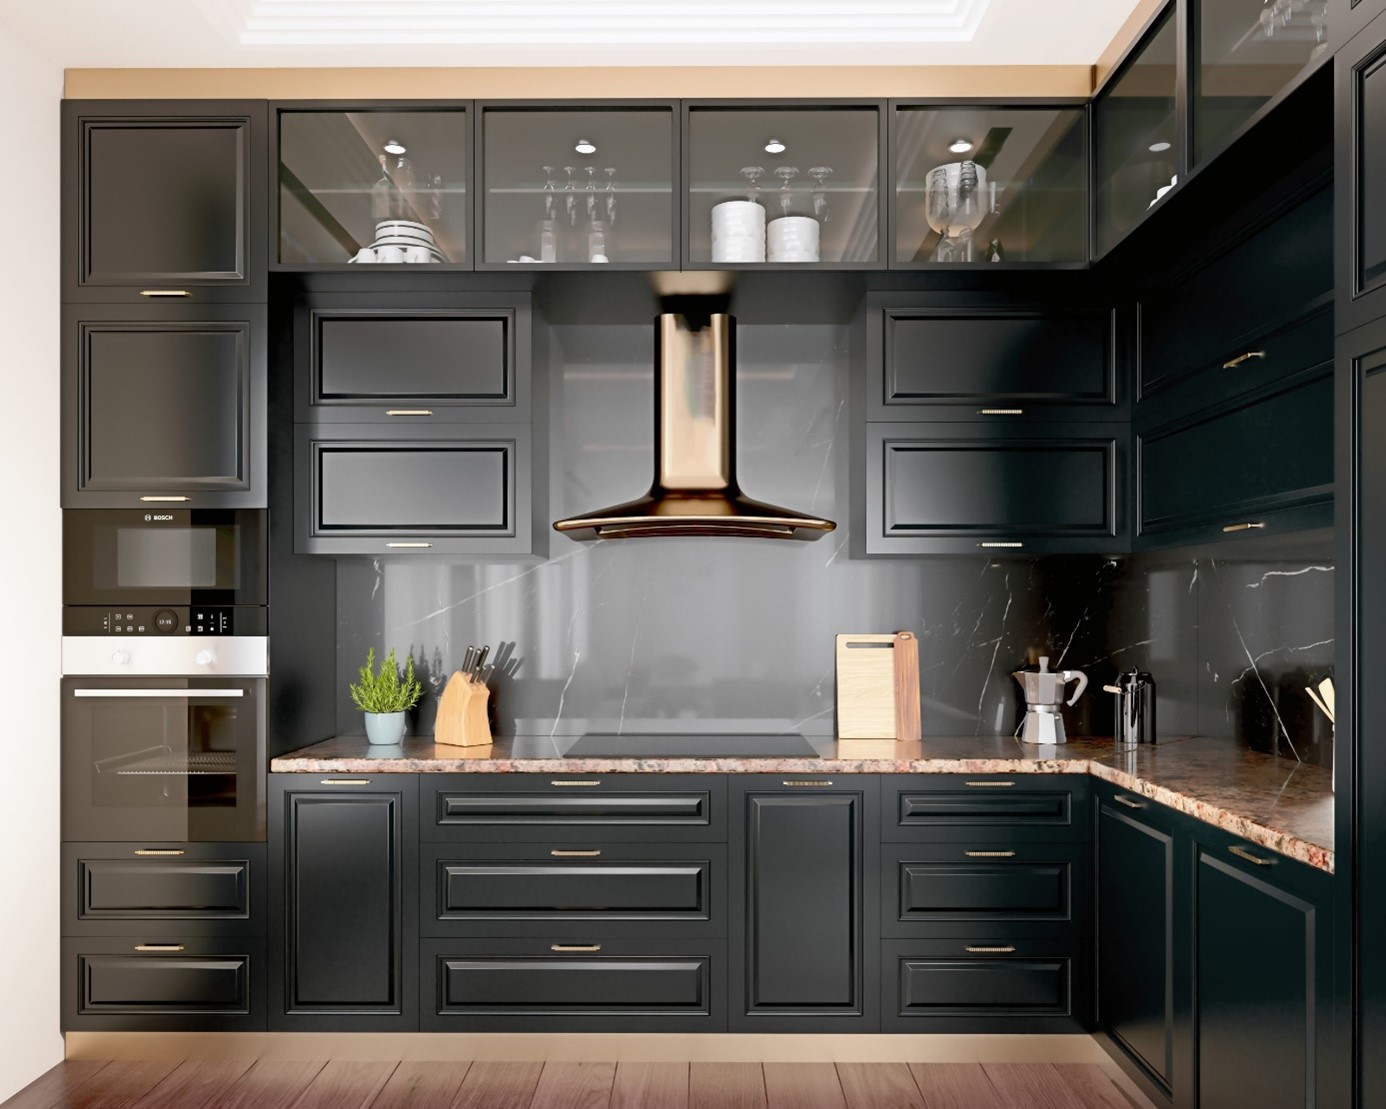 Lighter Elements in a Kitchen with Dark Cabinets